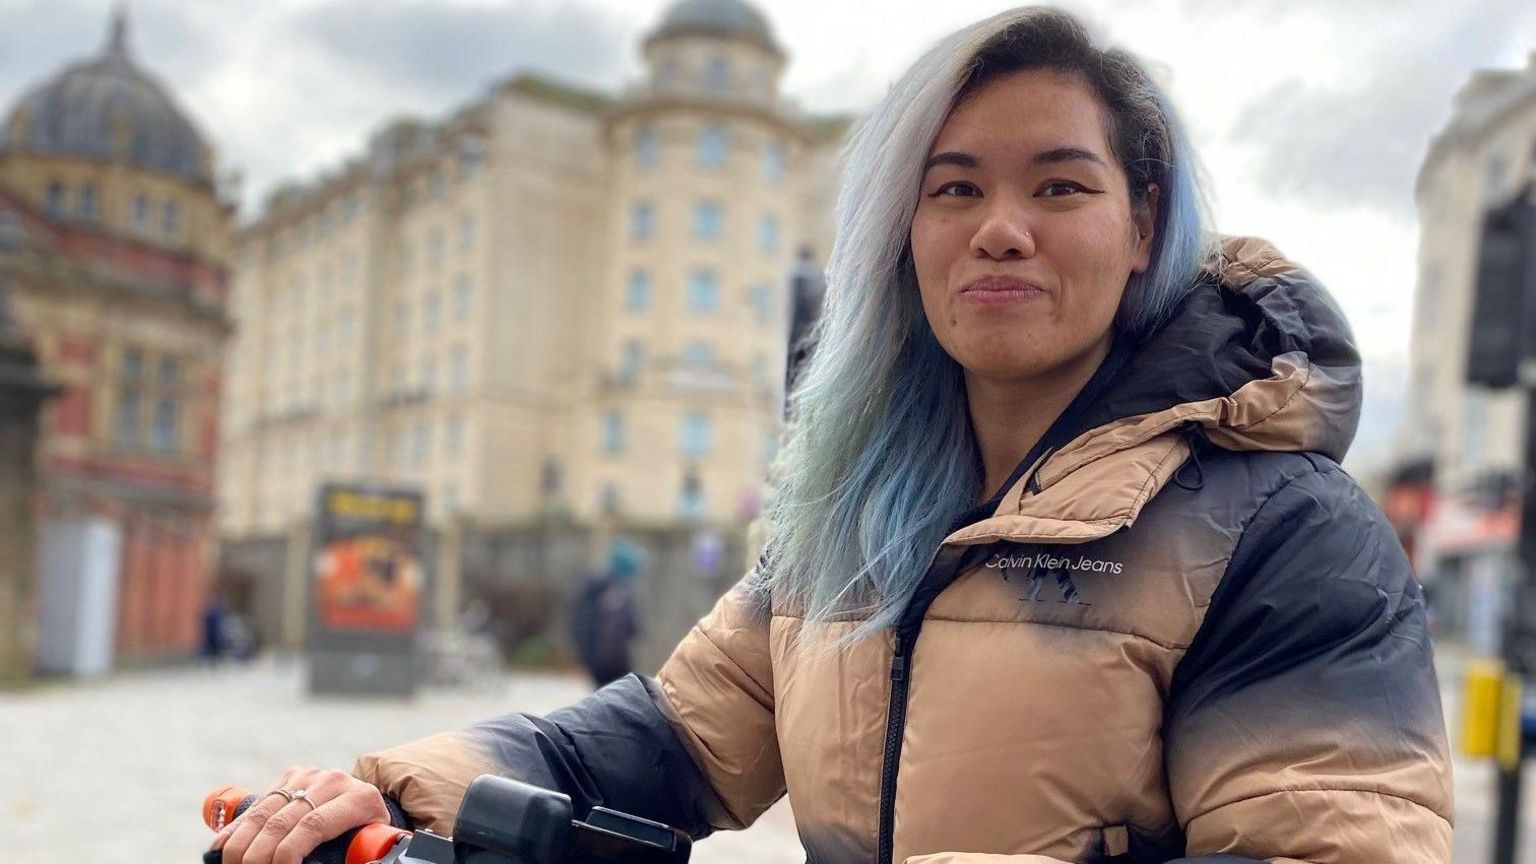 Jess wearing a cream and dark blue puffer jacket with blue hair standing with an e-scooter smiling at the camera